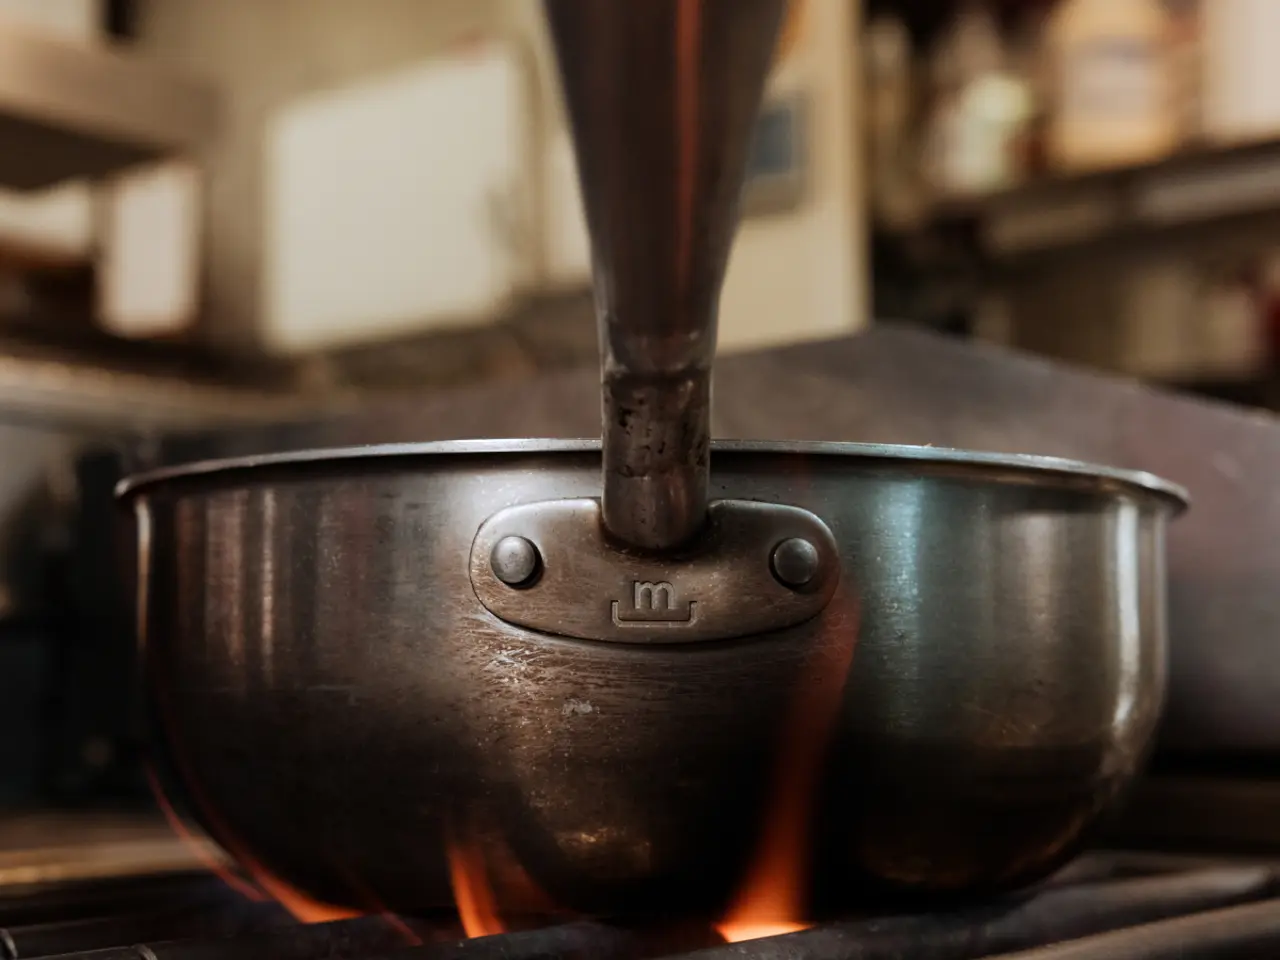 A saucepan heats up on a gas stove with flames licking the bottom.